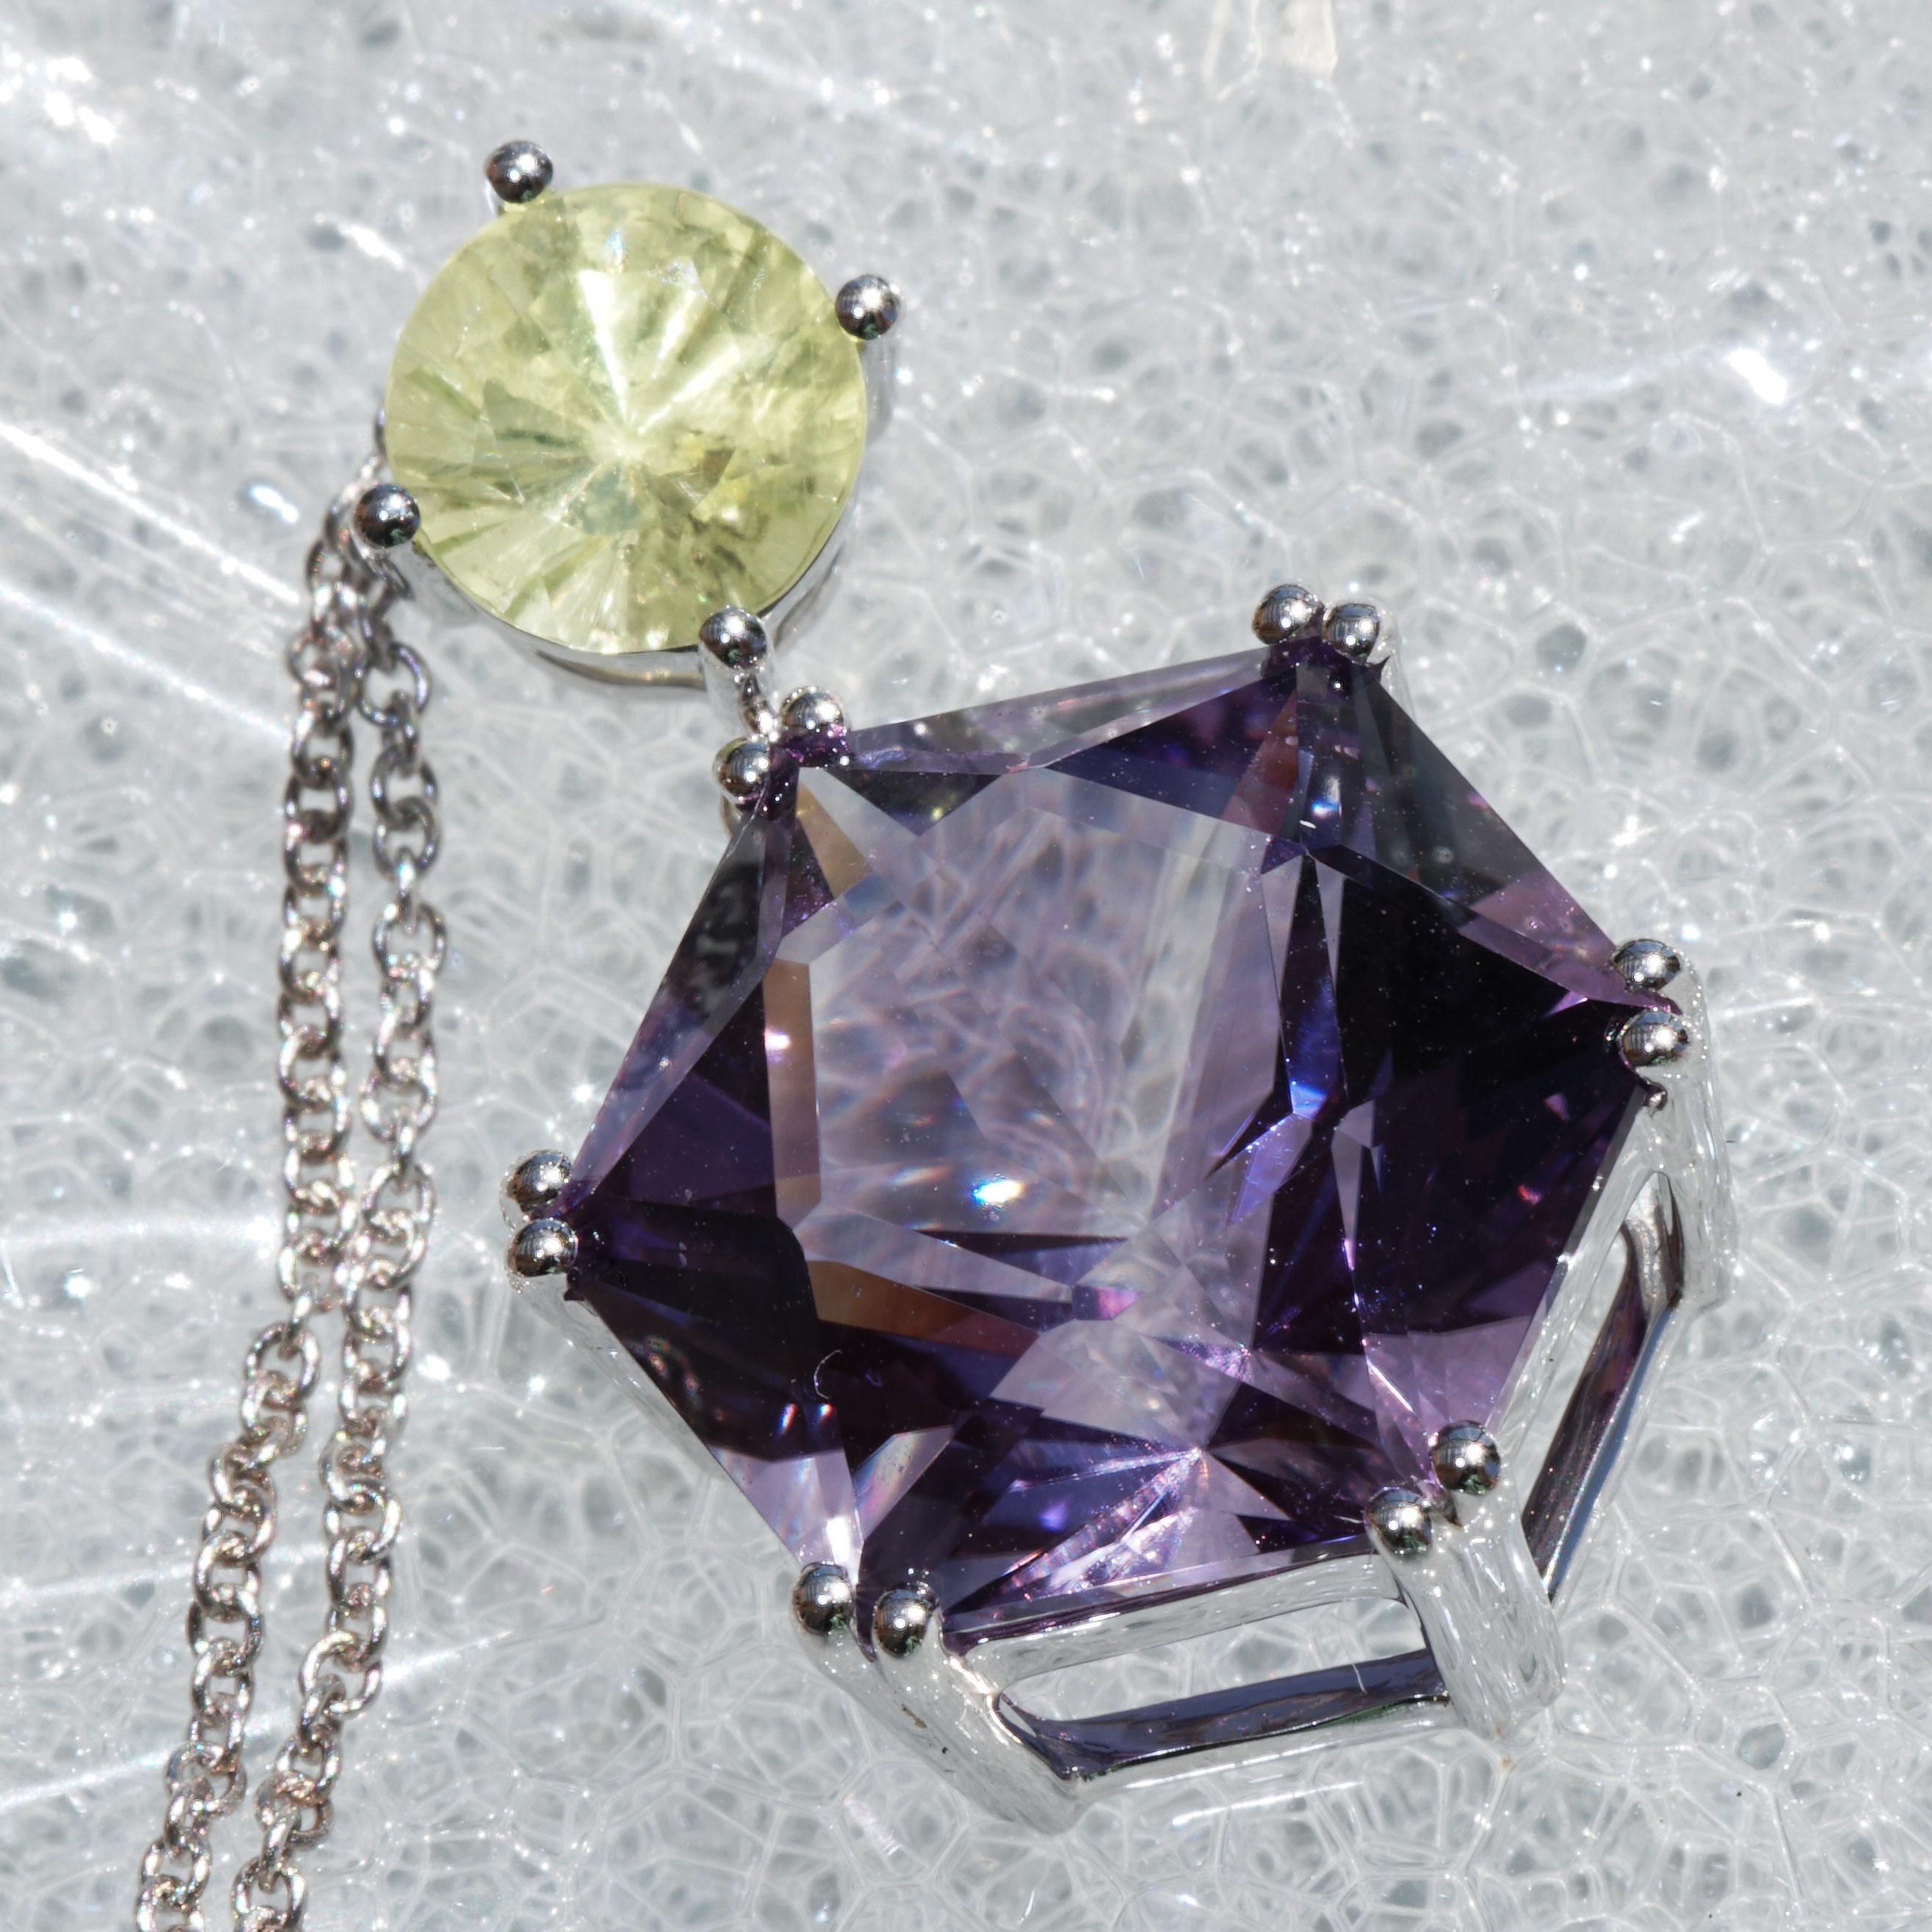 Modern Chrysoberyll Amethyst Pendant with Chain neverseen Colors 10 ct Star Cut Brazil For Sale